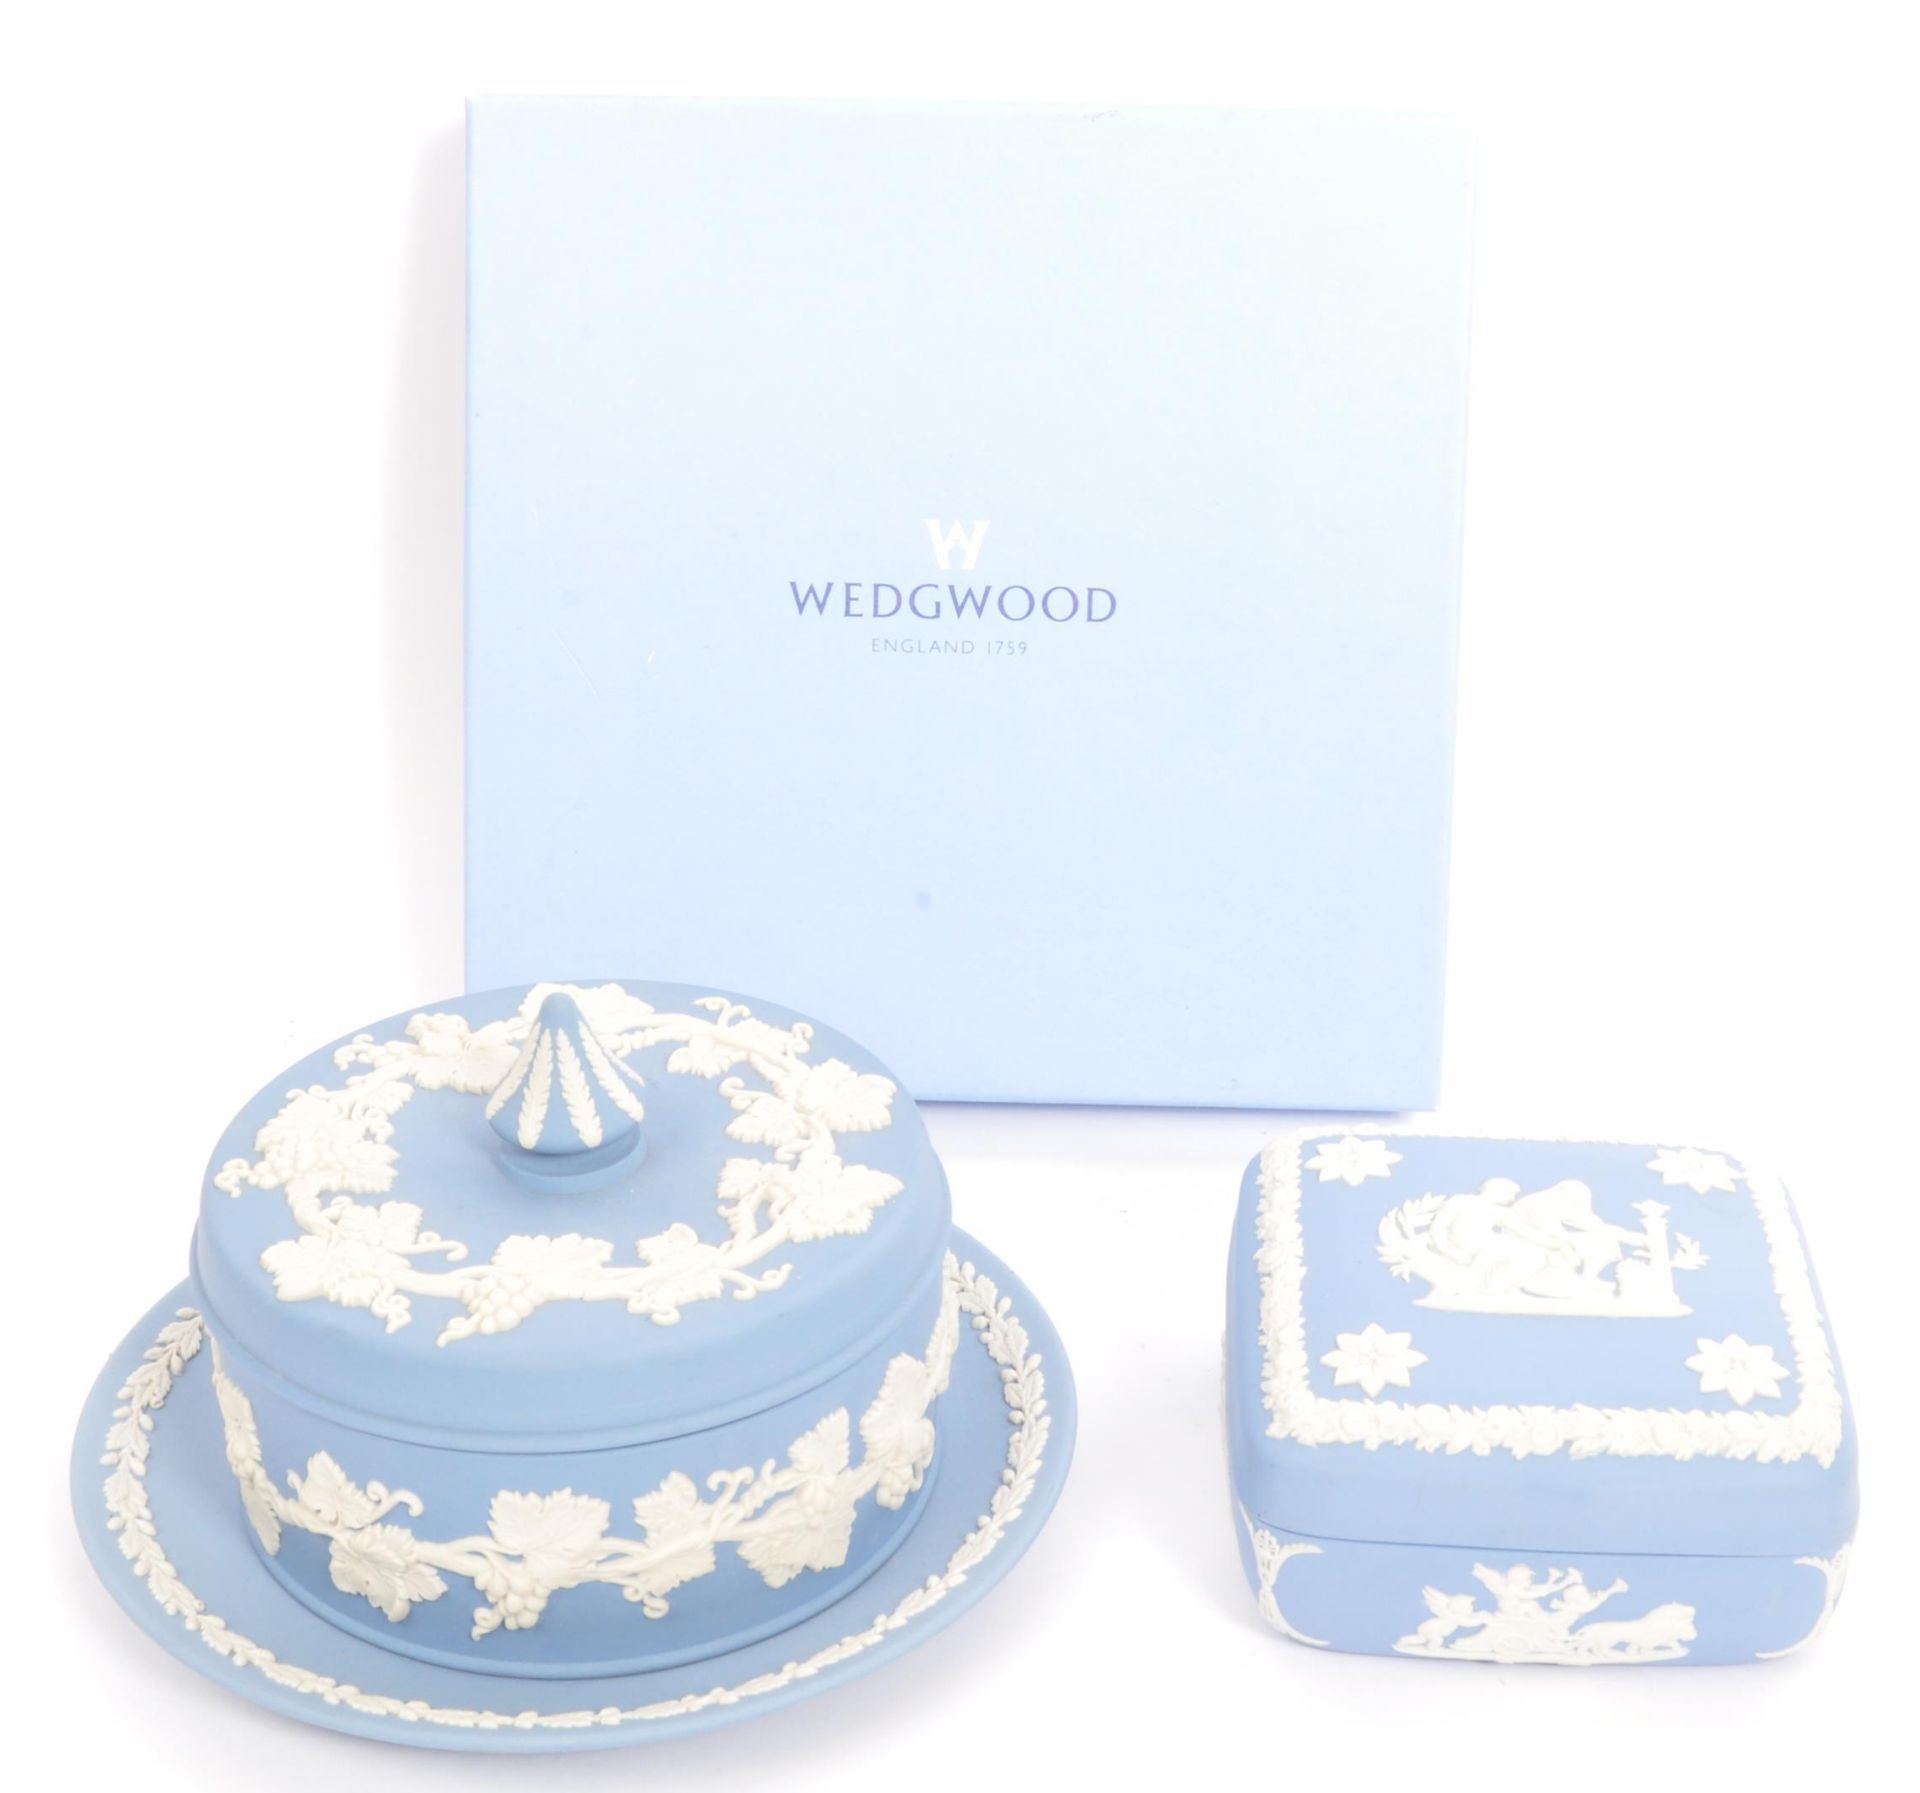 COLLECTION OF VINTAGE 20TH CENTURY WEDGWOOD JASPERWARE ITEMS - Image 5 of 8